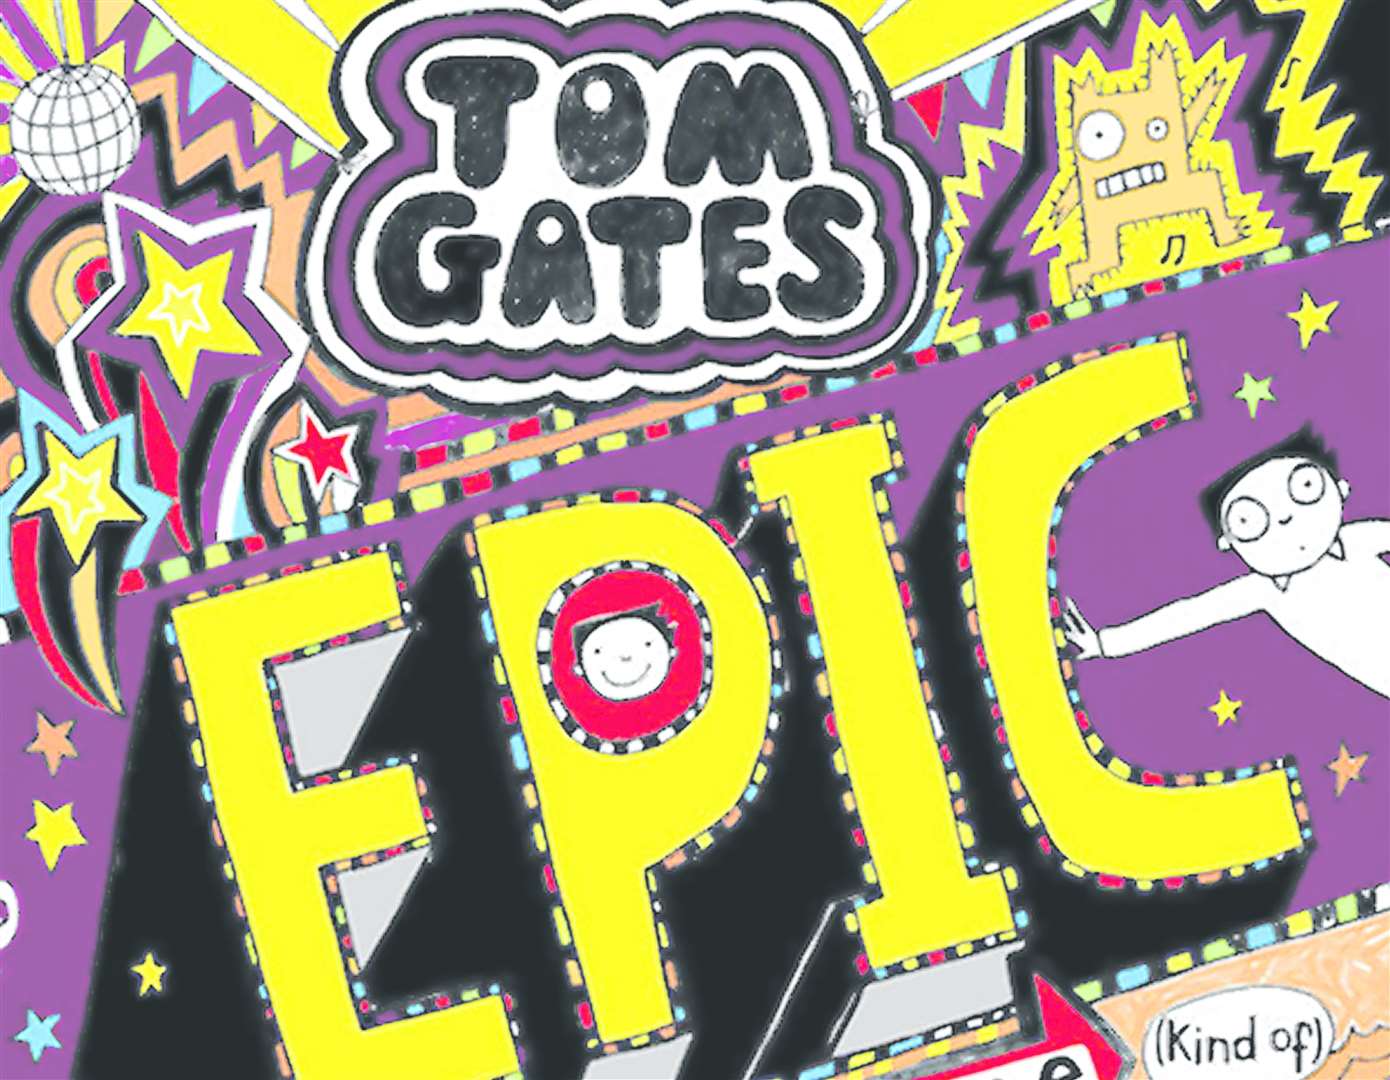 Tom Gates have a huge following amongst young readers